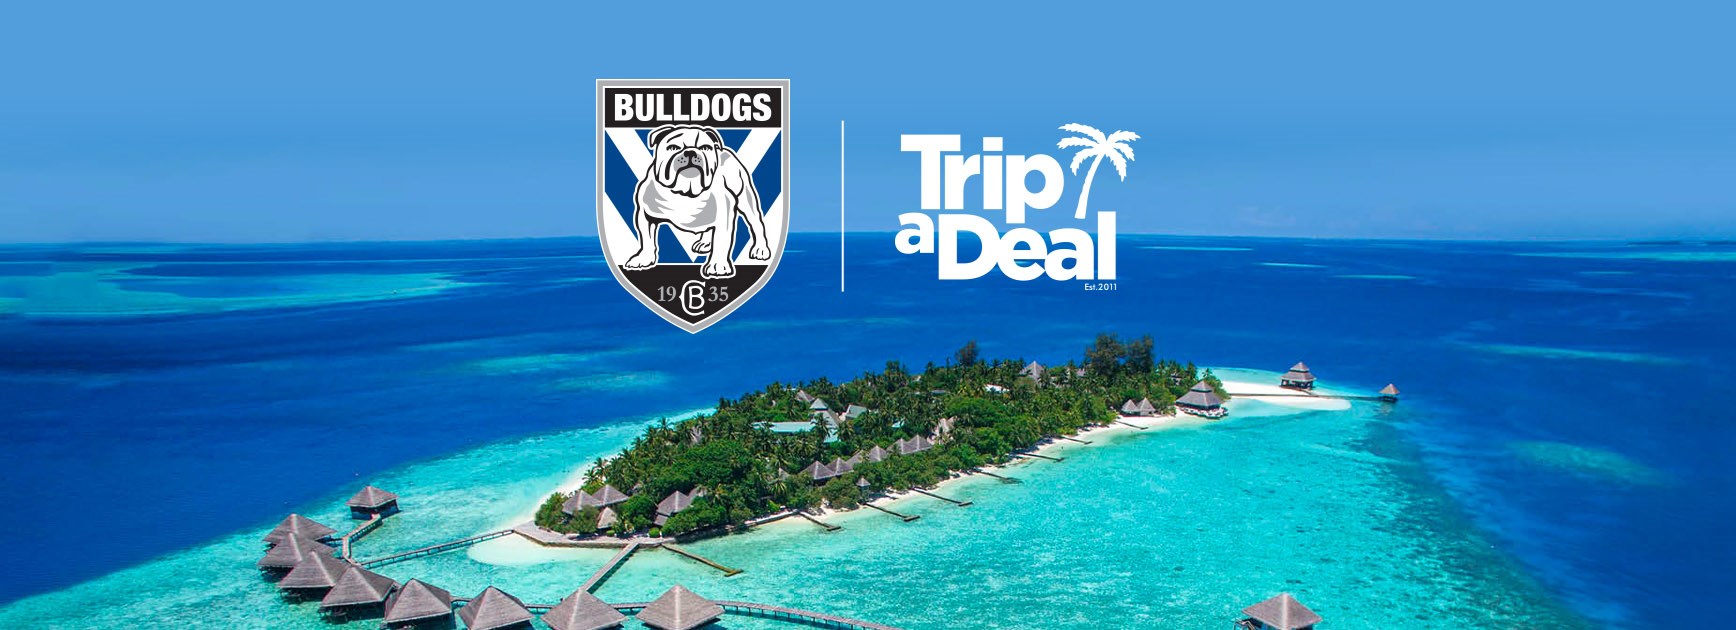 TripADeal to provide Bulldogs Members with a unique travel offer